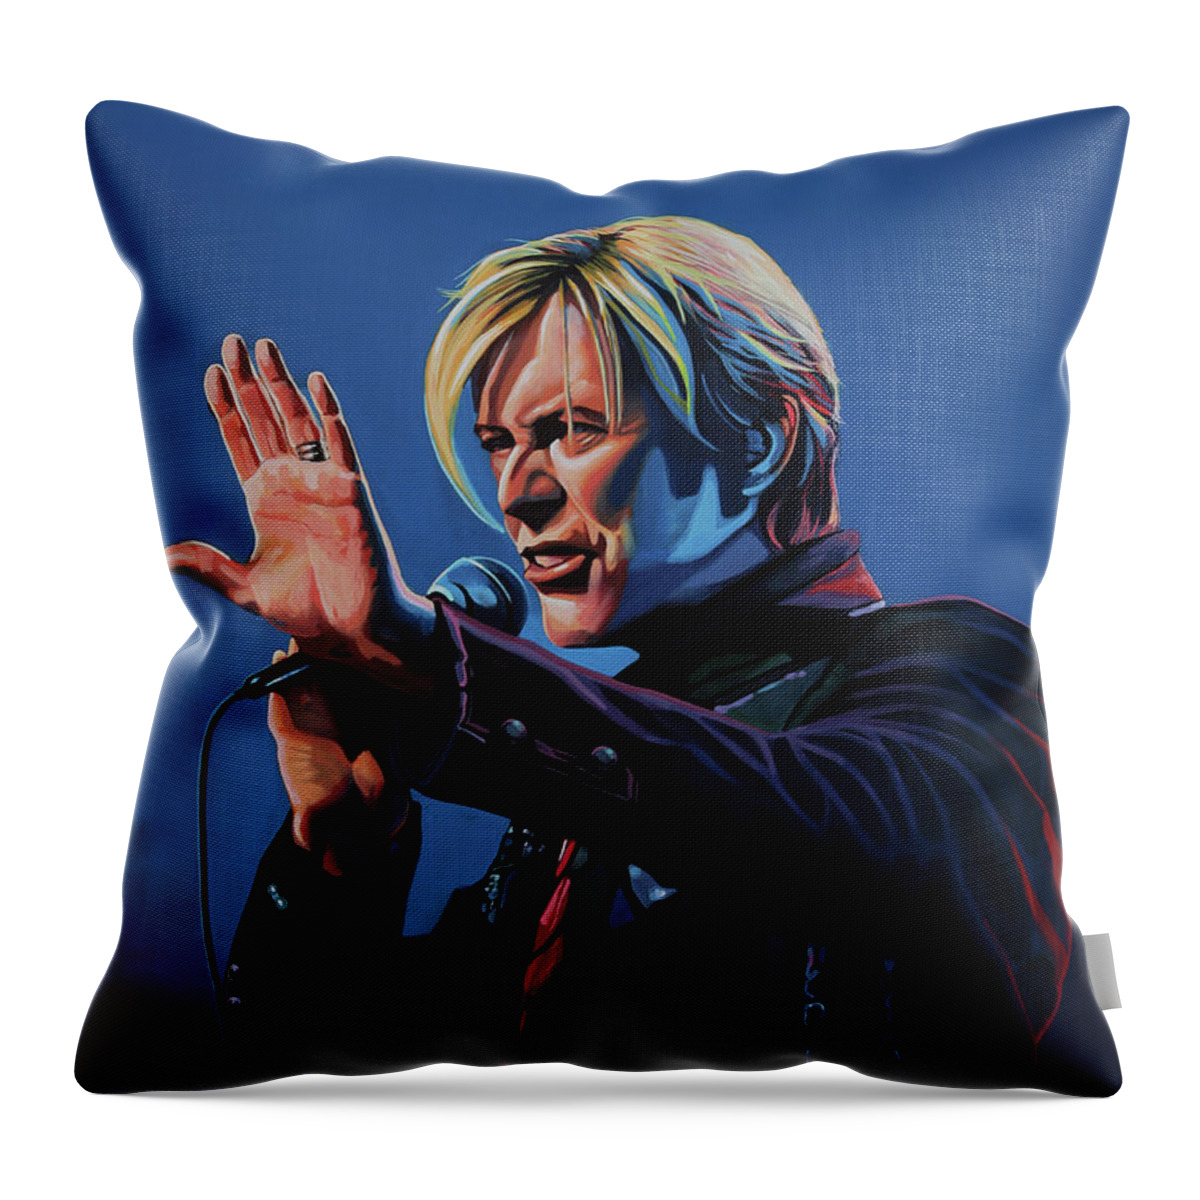 David Bowie Throw Pillow featuring the painting David Bowie Live Painting by Paul Meijering